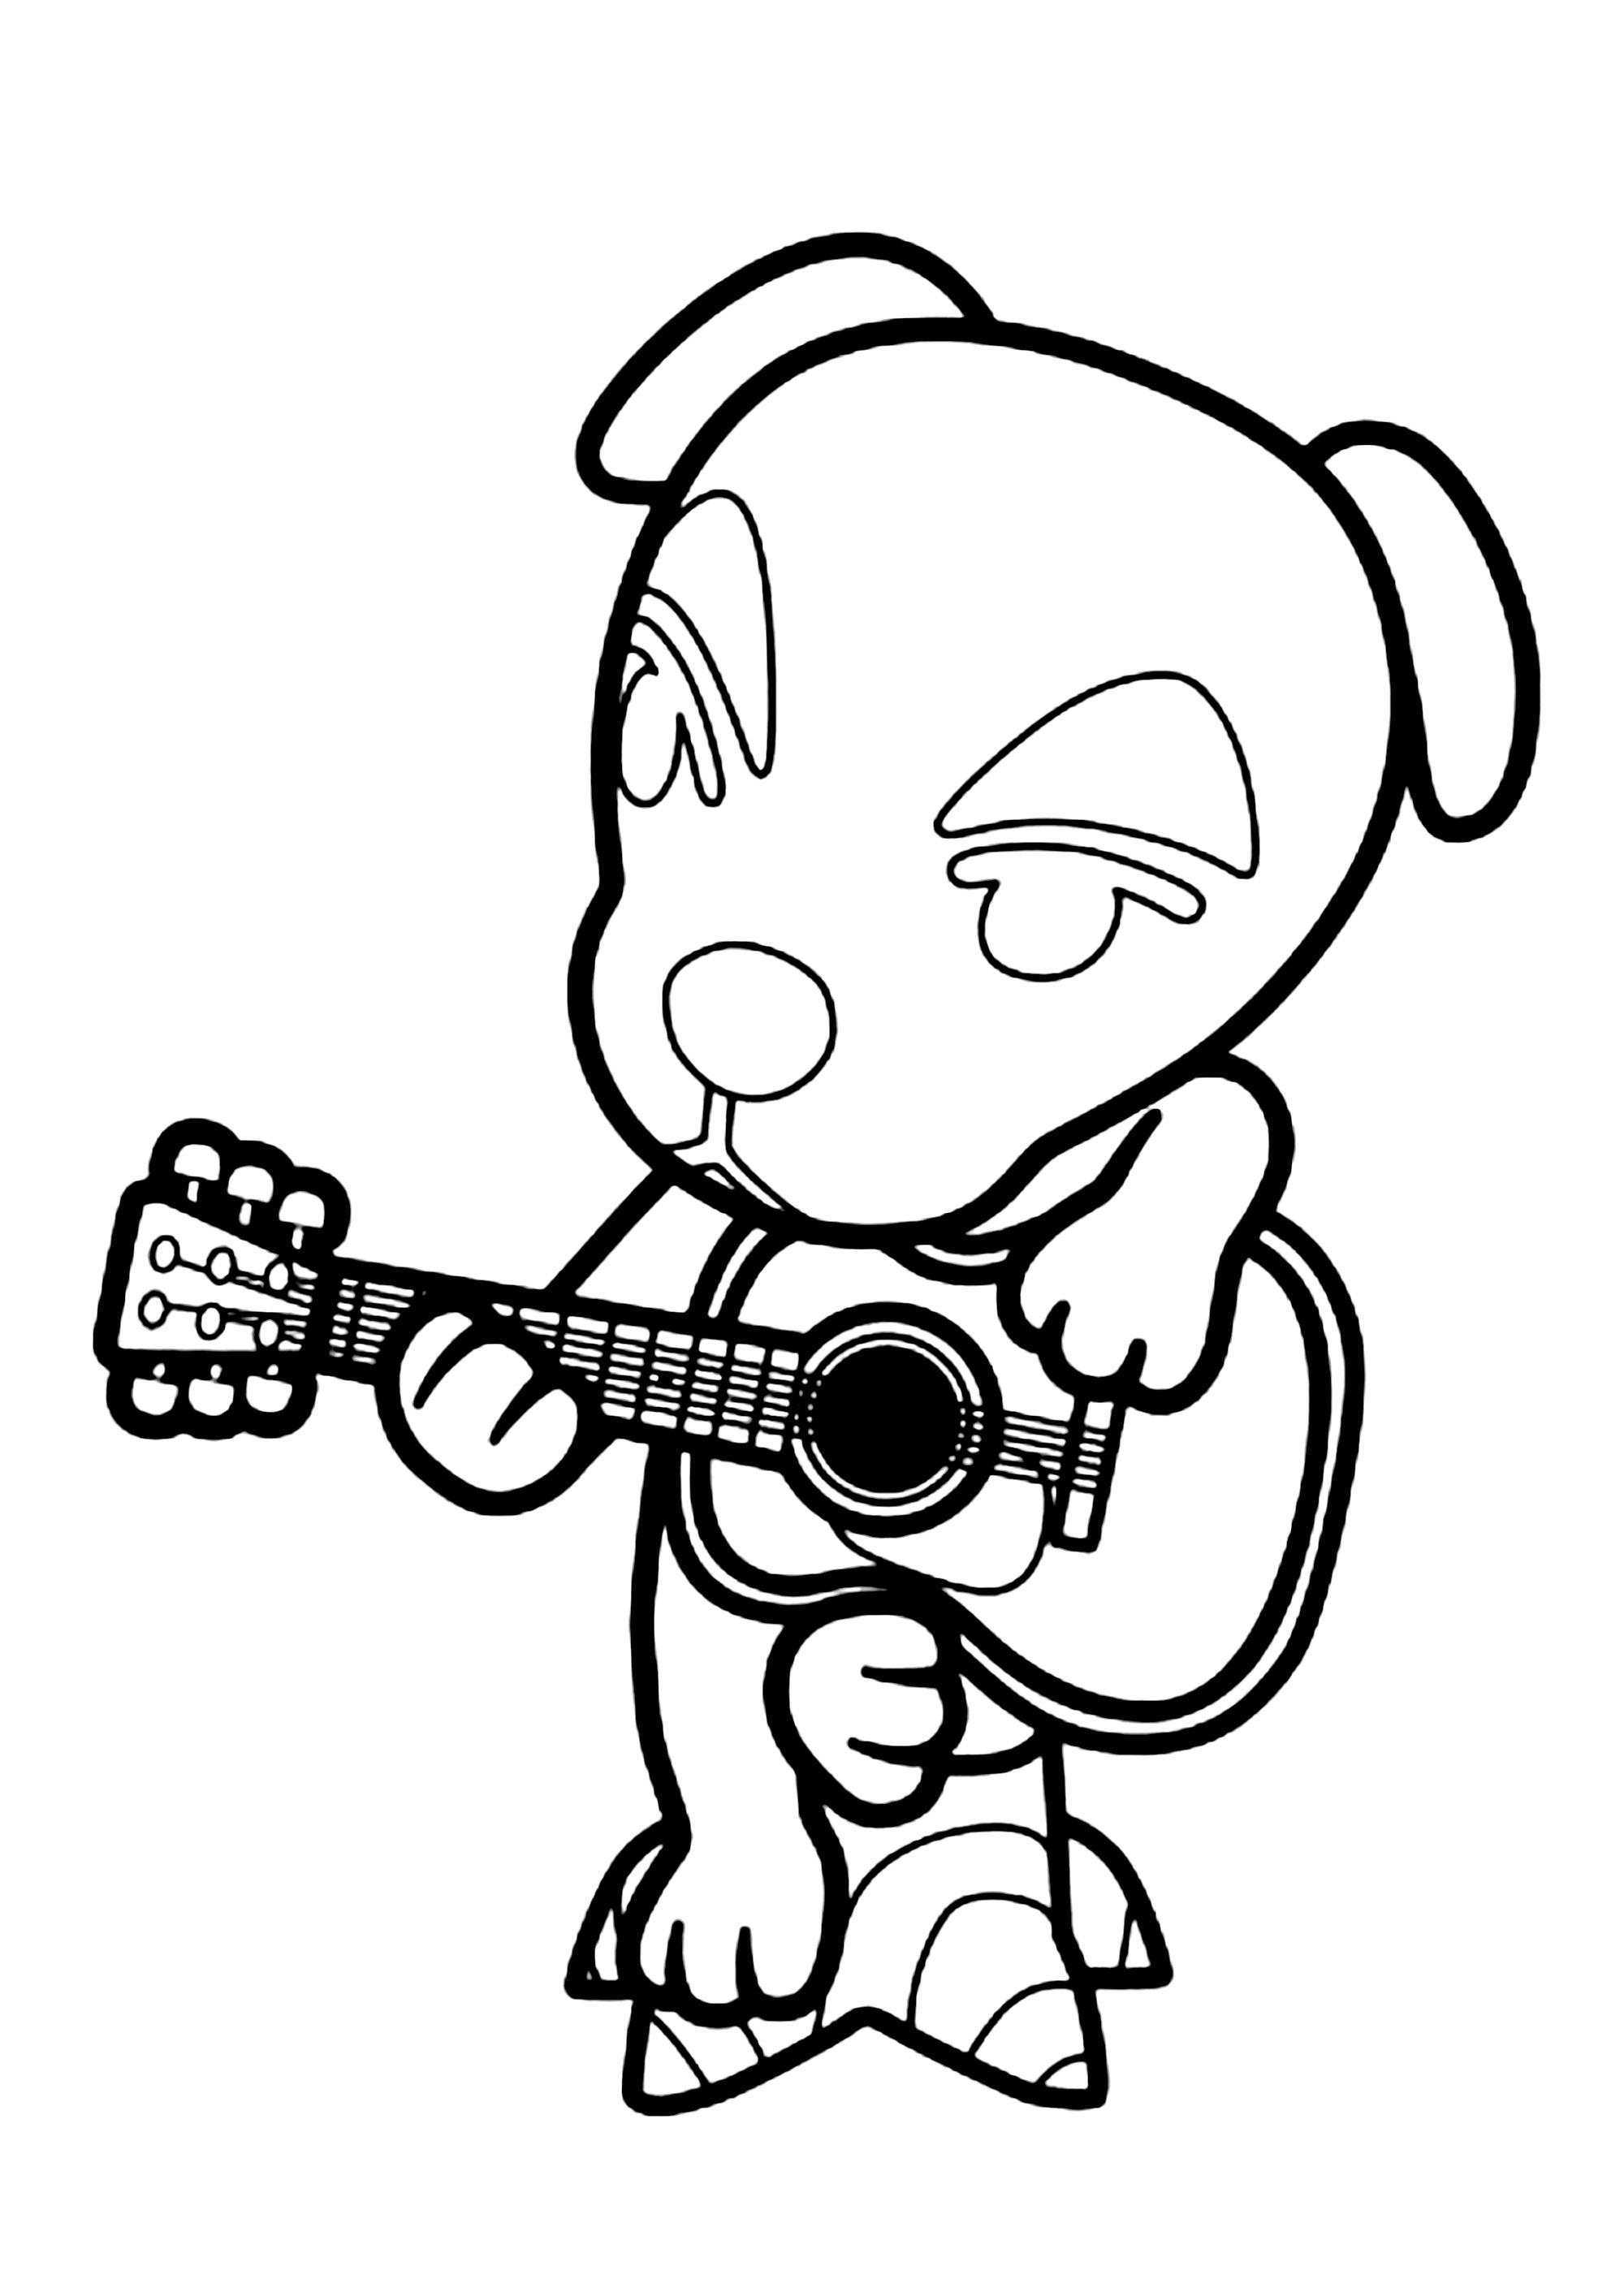 Simple Animal Crossing coloring page to download for free